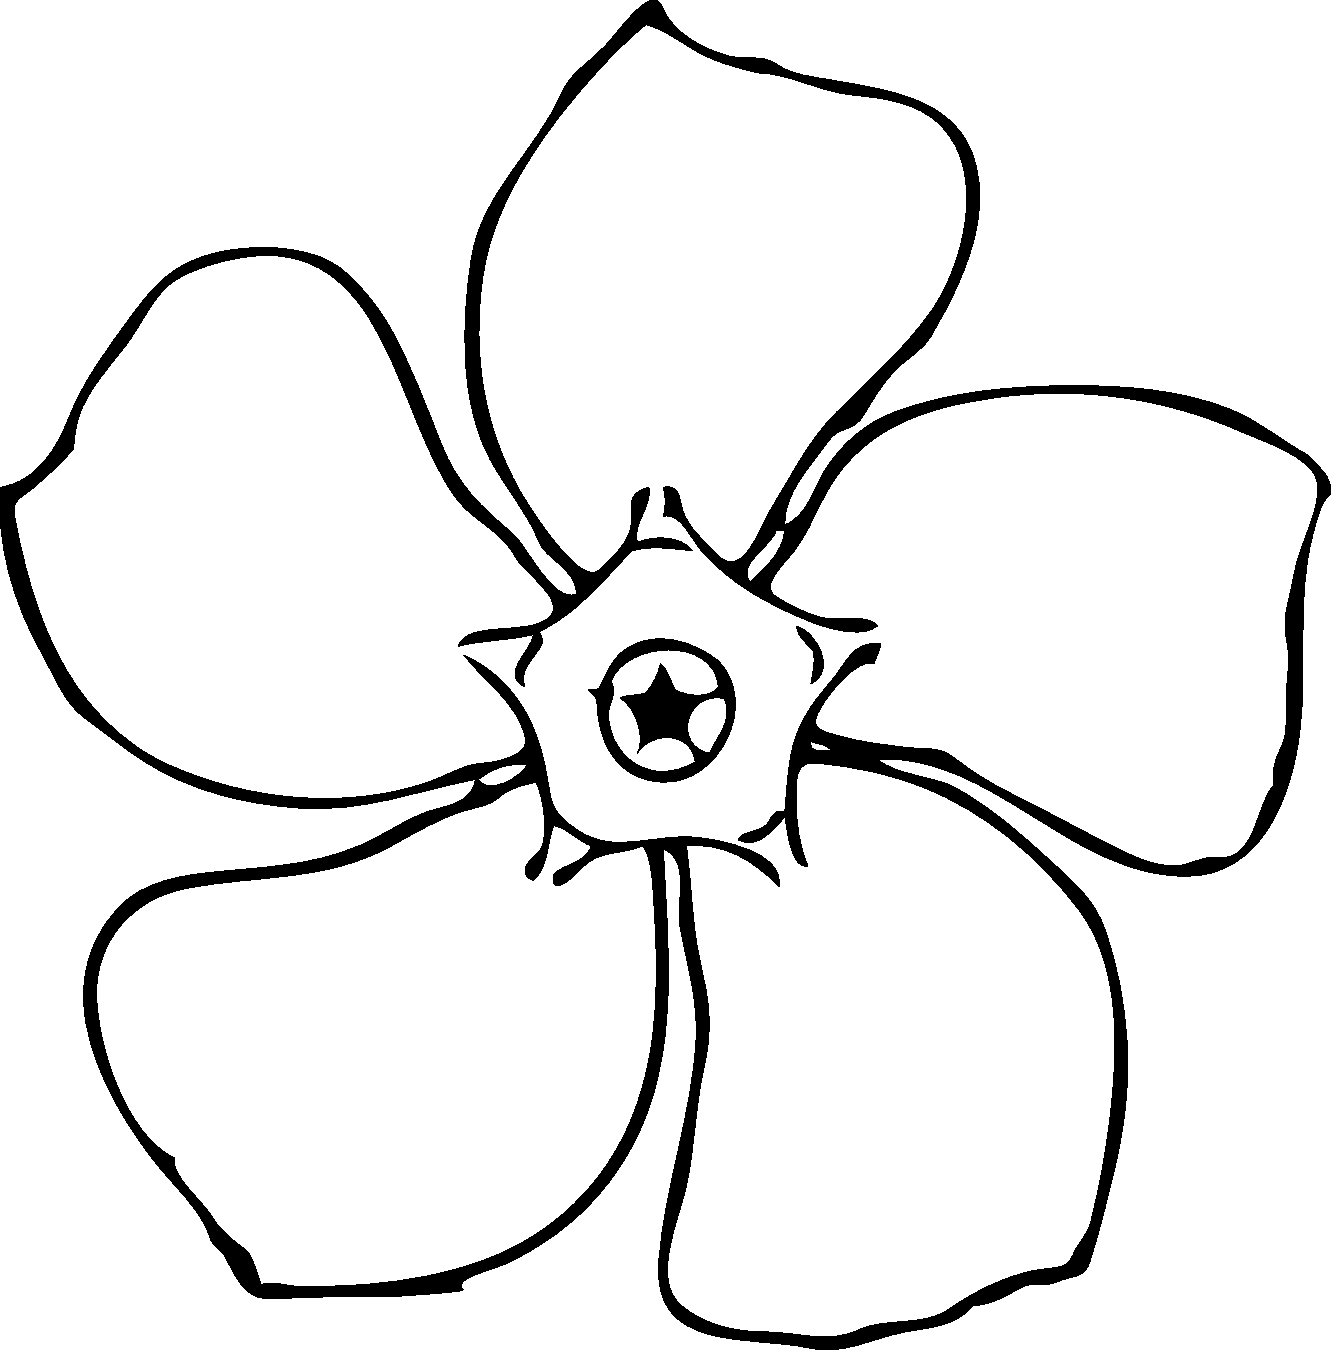 Flower Drawing Black And White - Drawing And Sketches